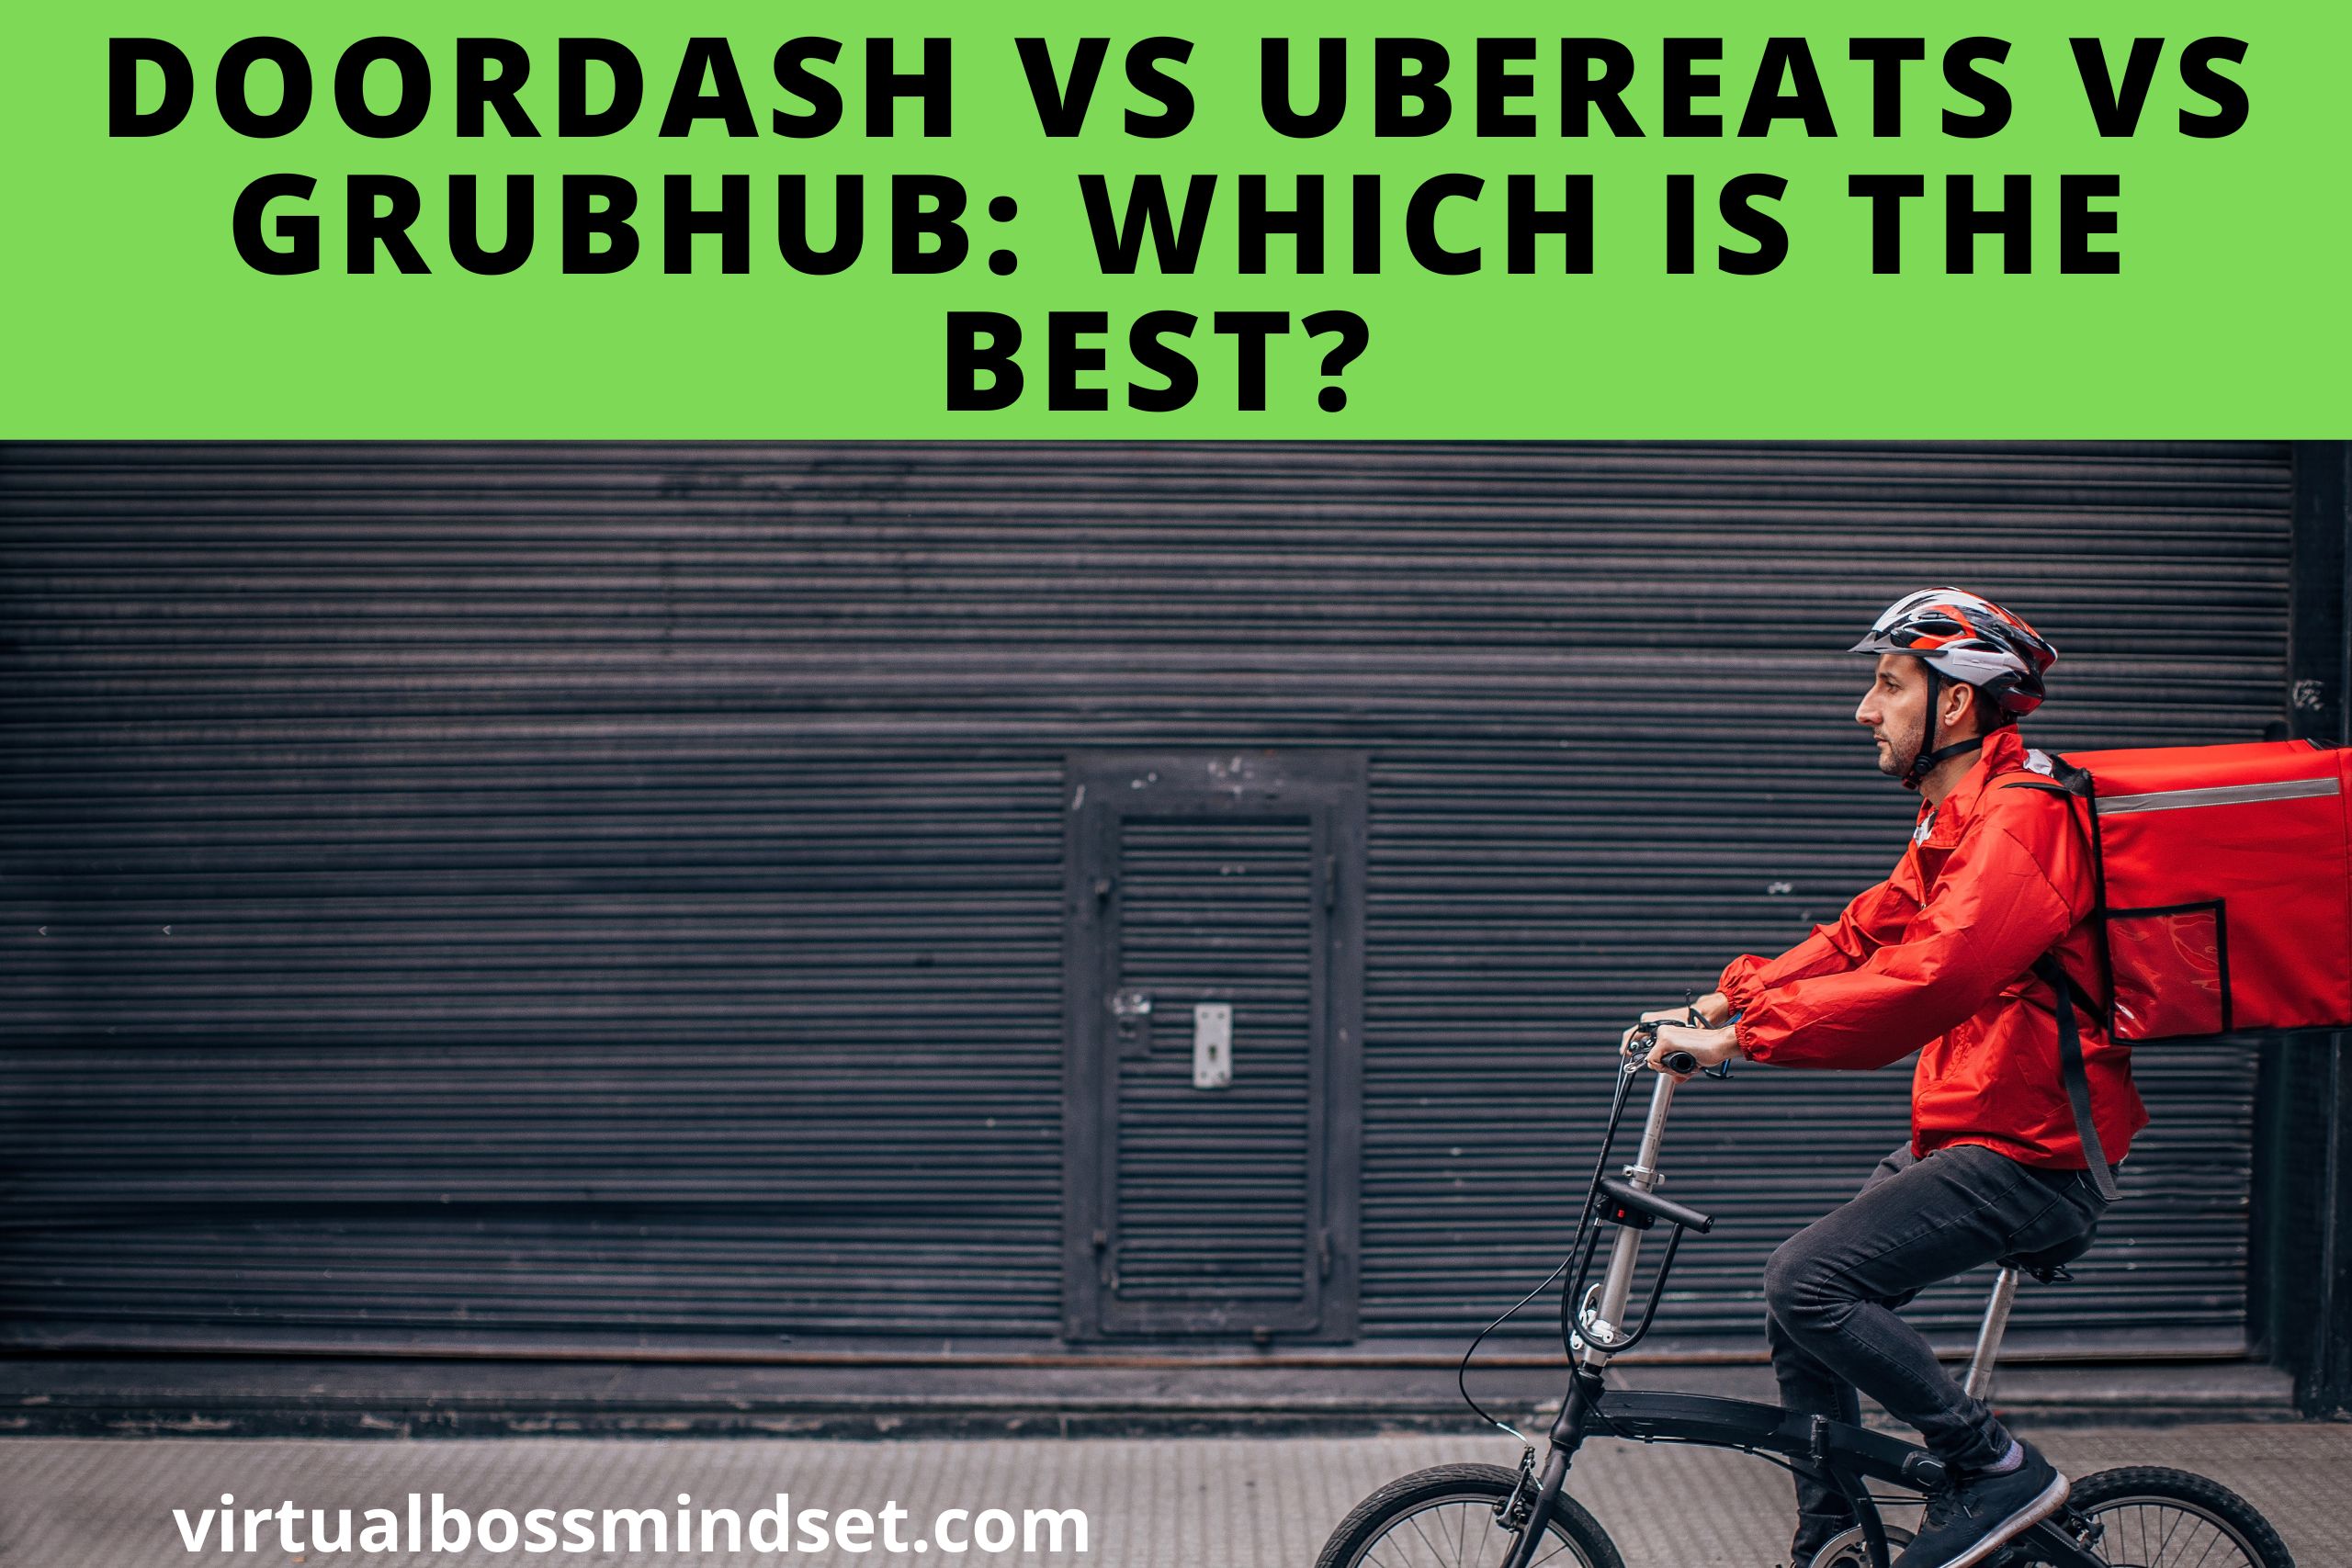 Doordash vs Ubereats vs Grubhub: What are the Best Food Delivery Services?